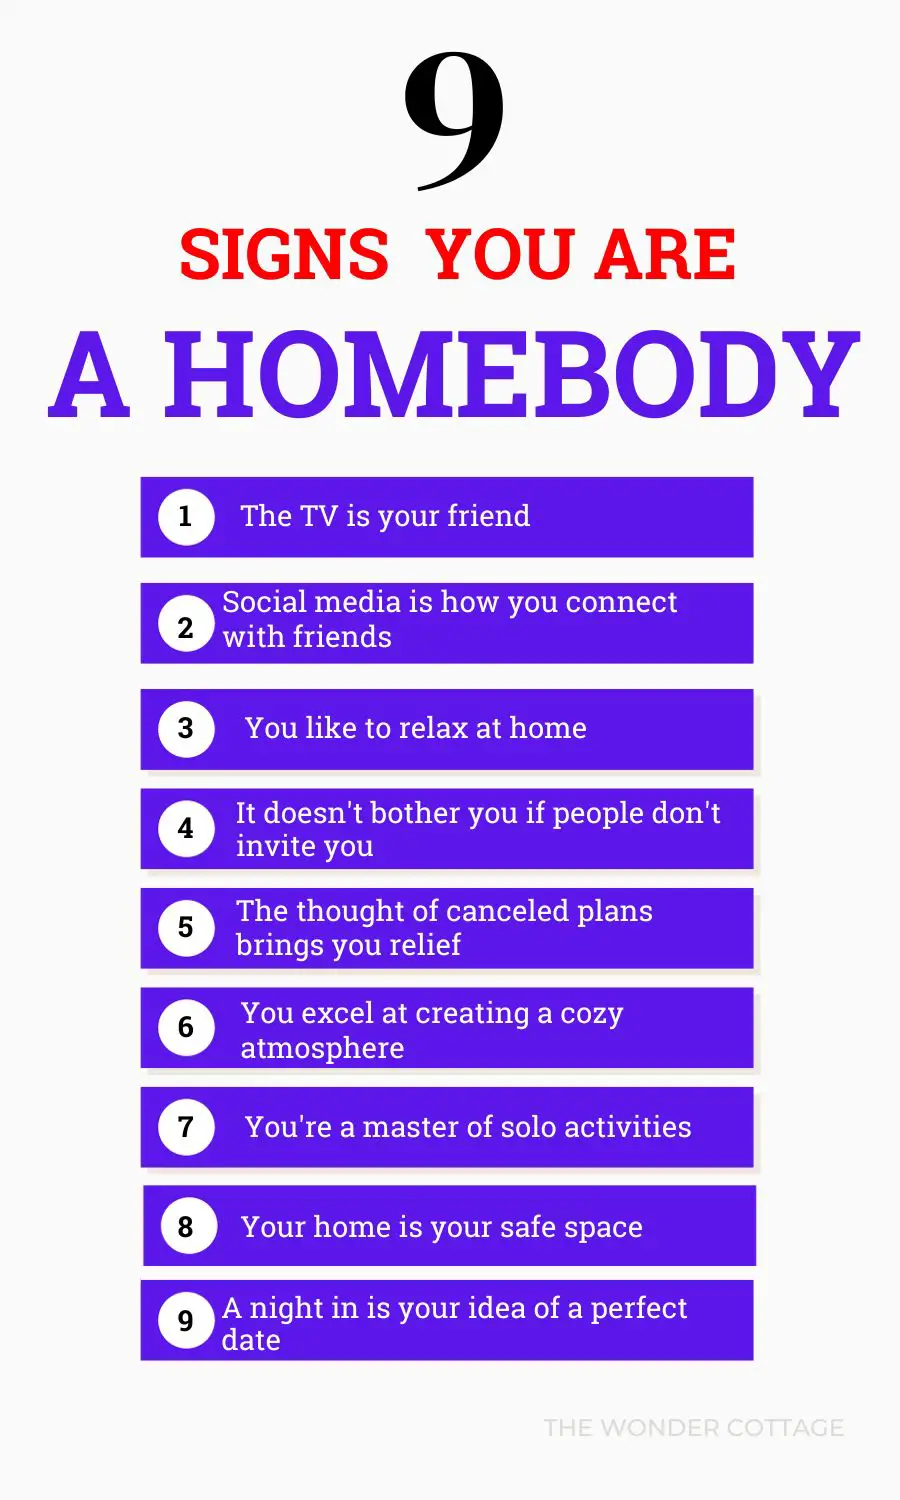 5 Signs You Are a Homebody